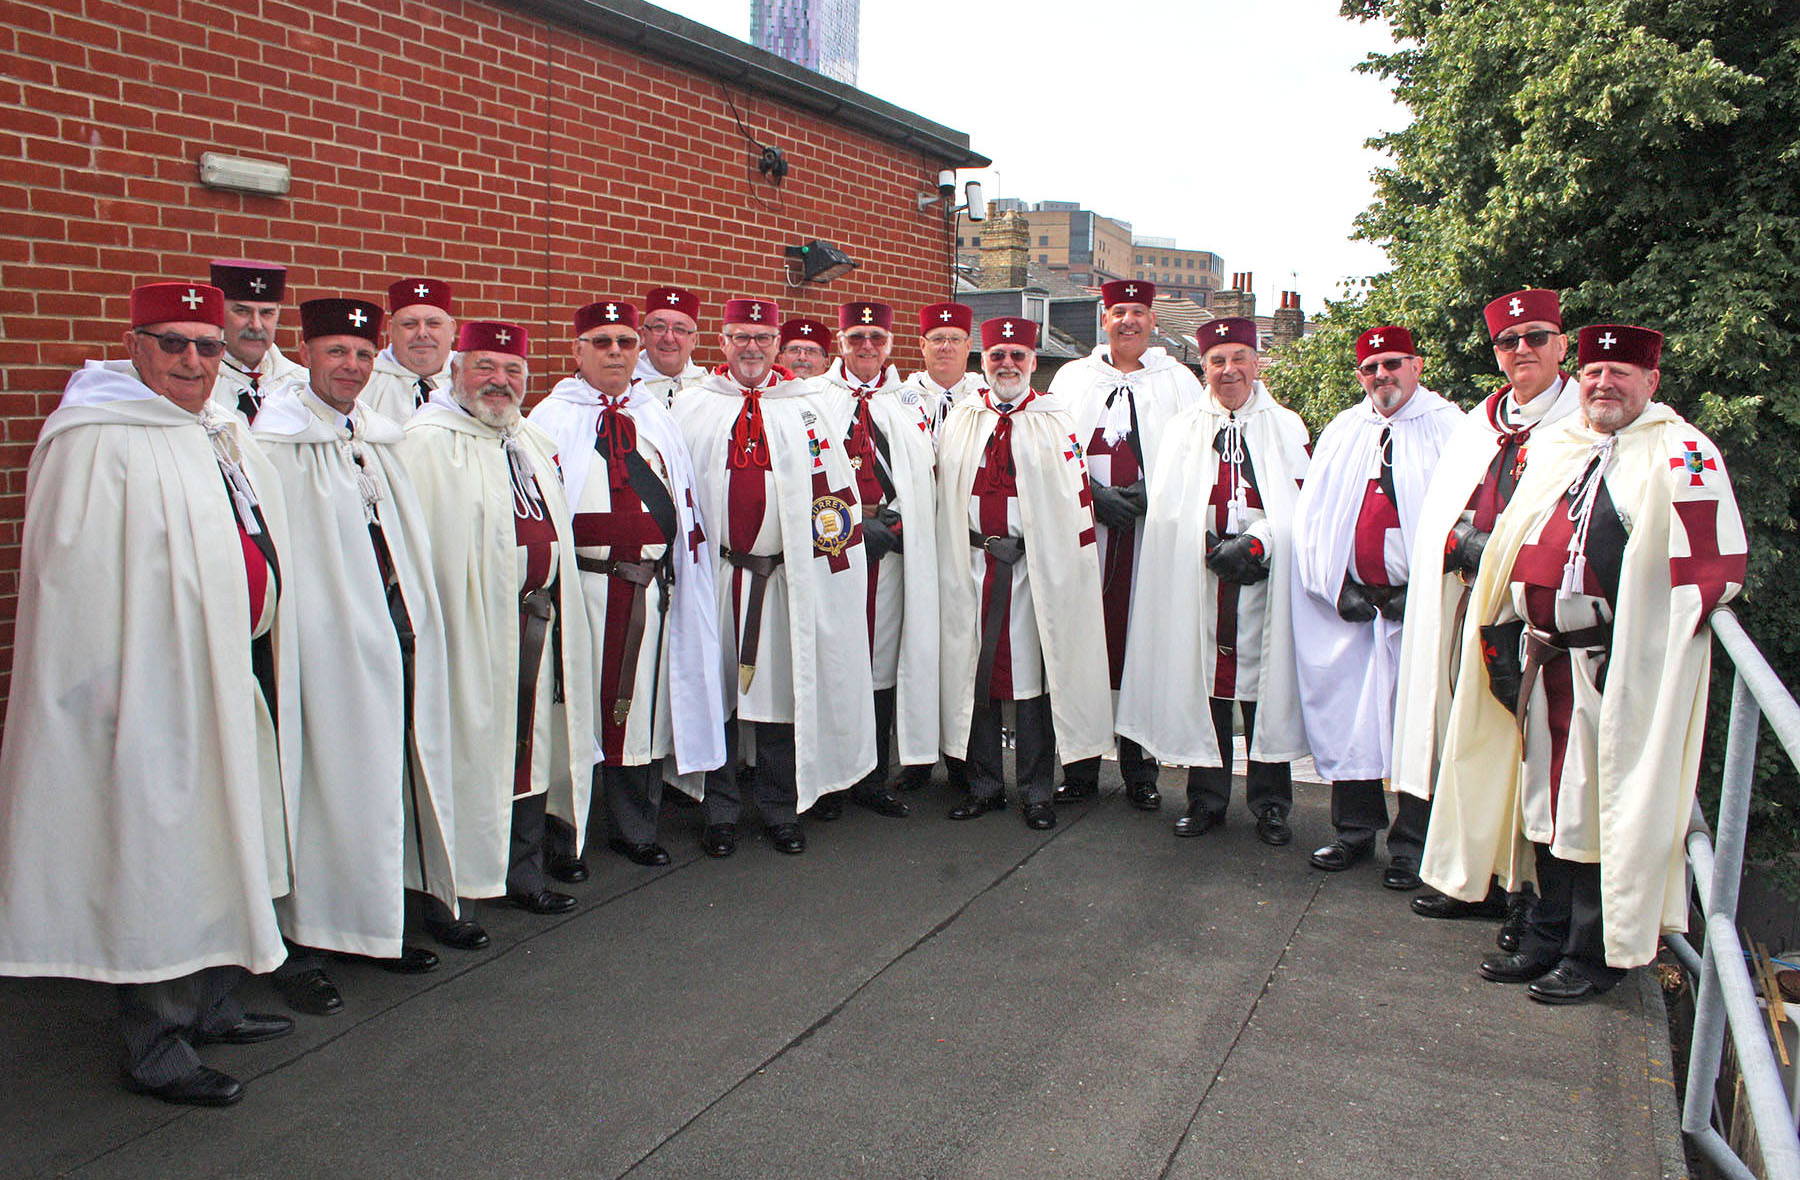 The 2019 Annual Meeting of the Provincial Priory of Surrey